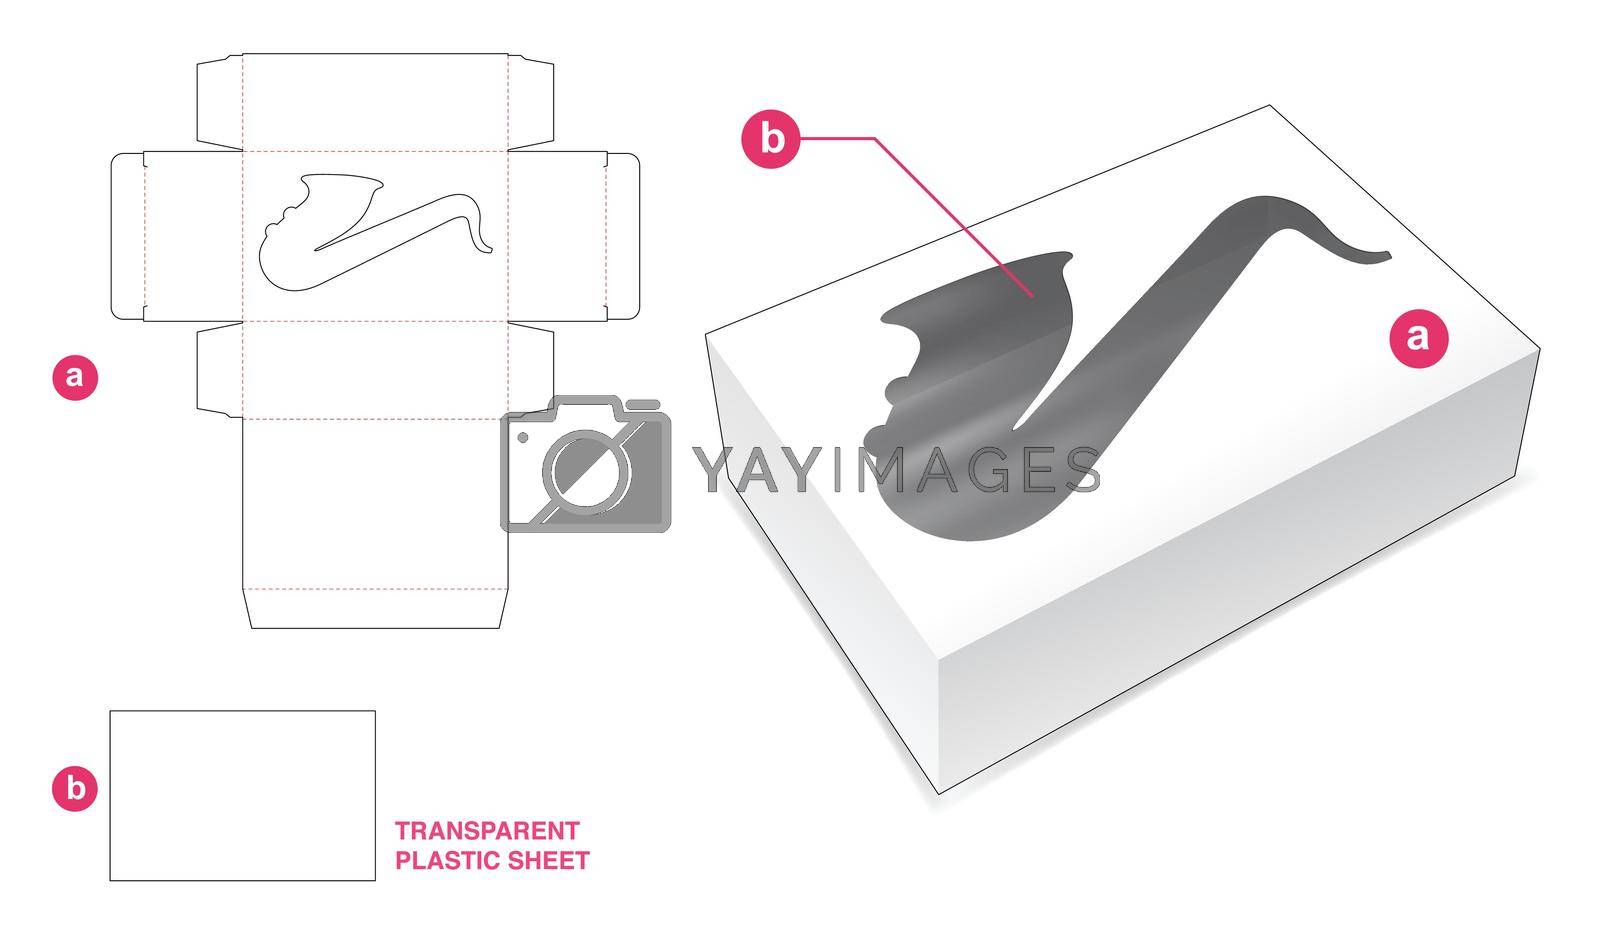 Royalty free image of Box and saxophone window with transparent plastic sheet die cut template by valueinvestor